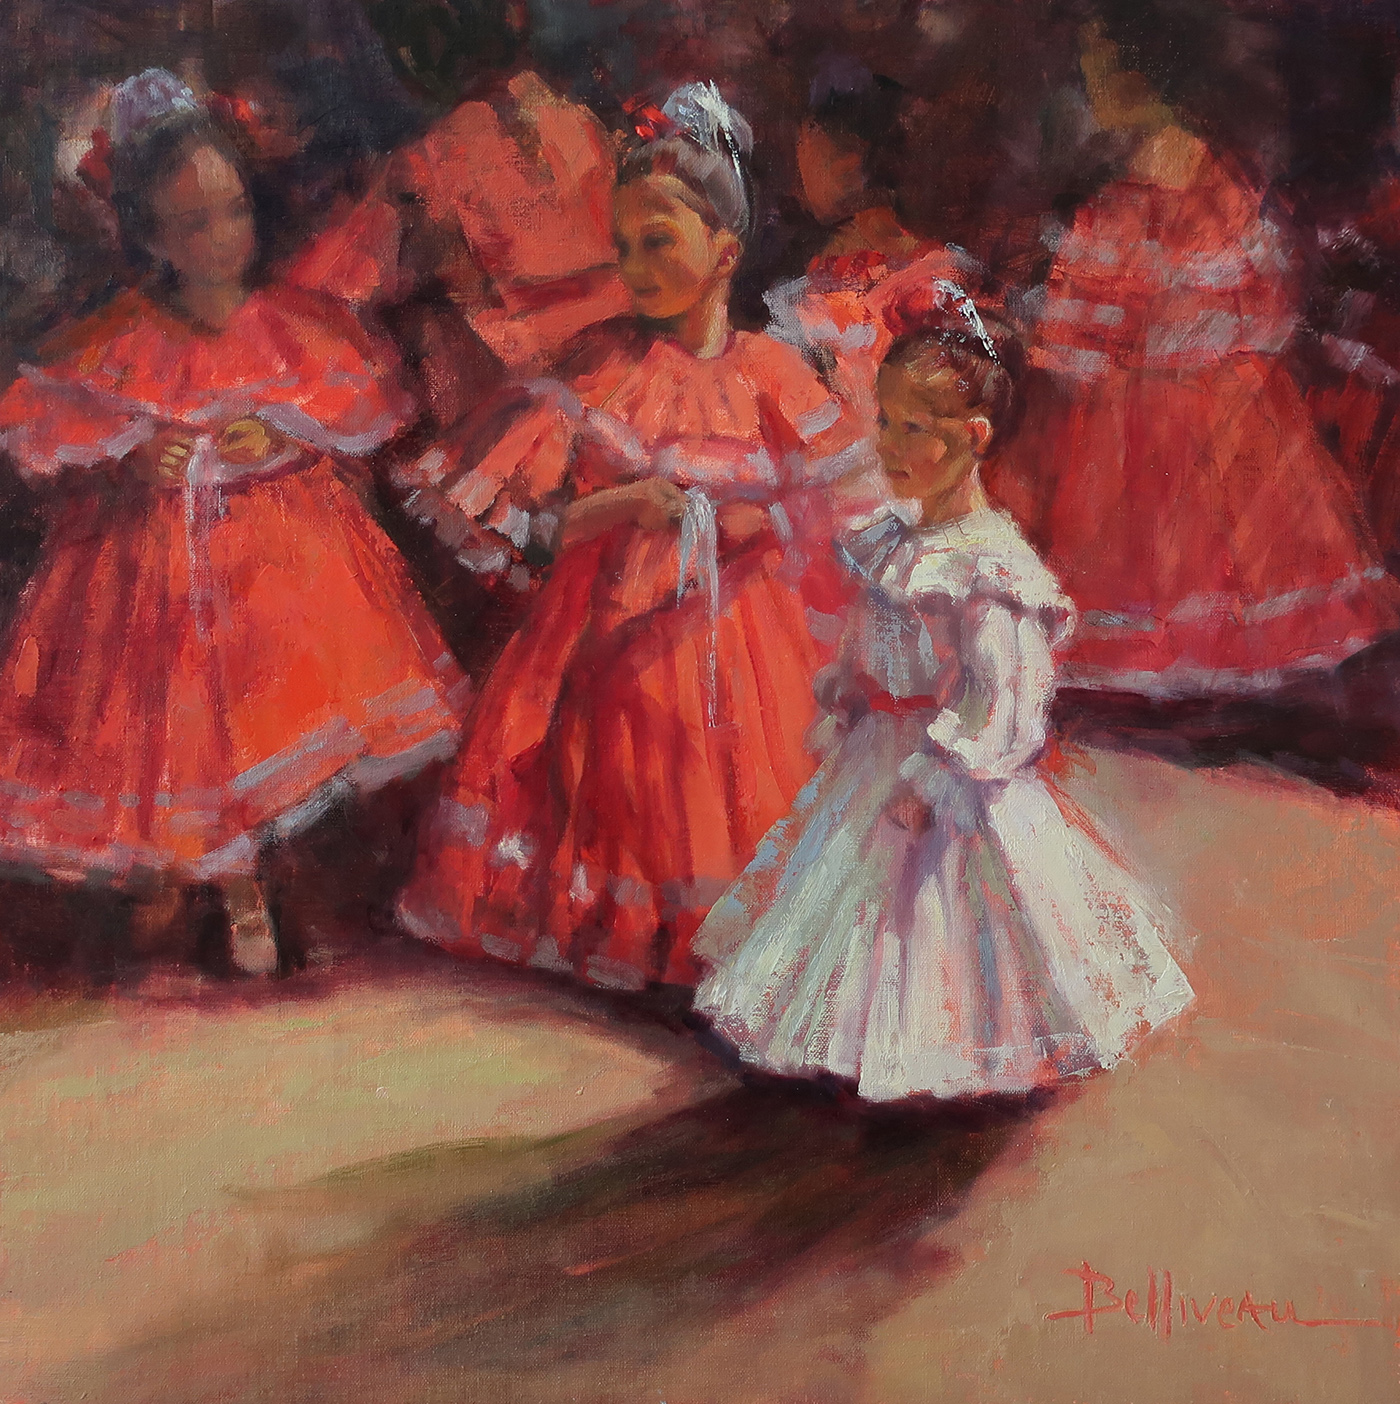 oil painting of dancers in red-orange dresses with one in white dress